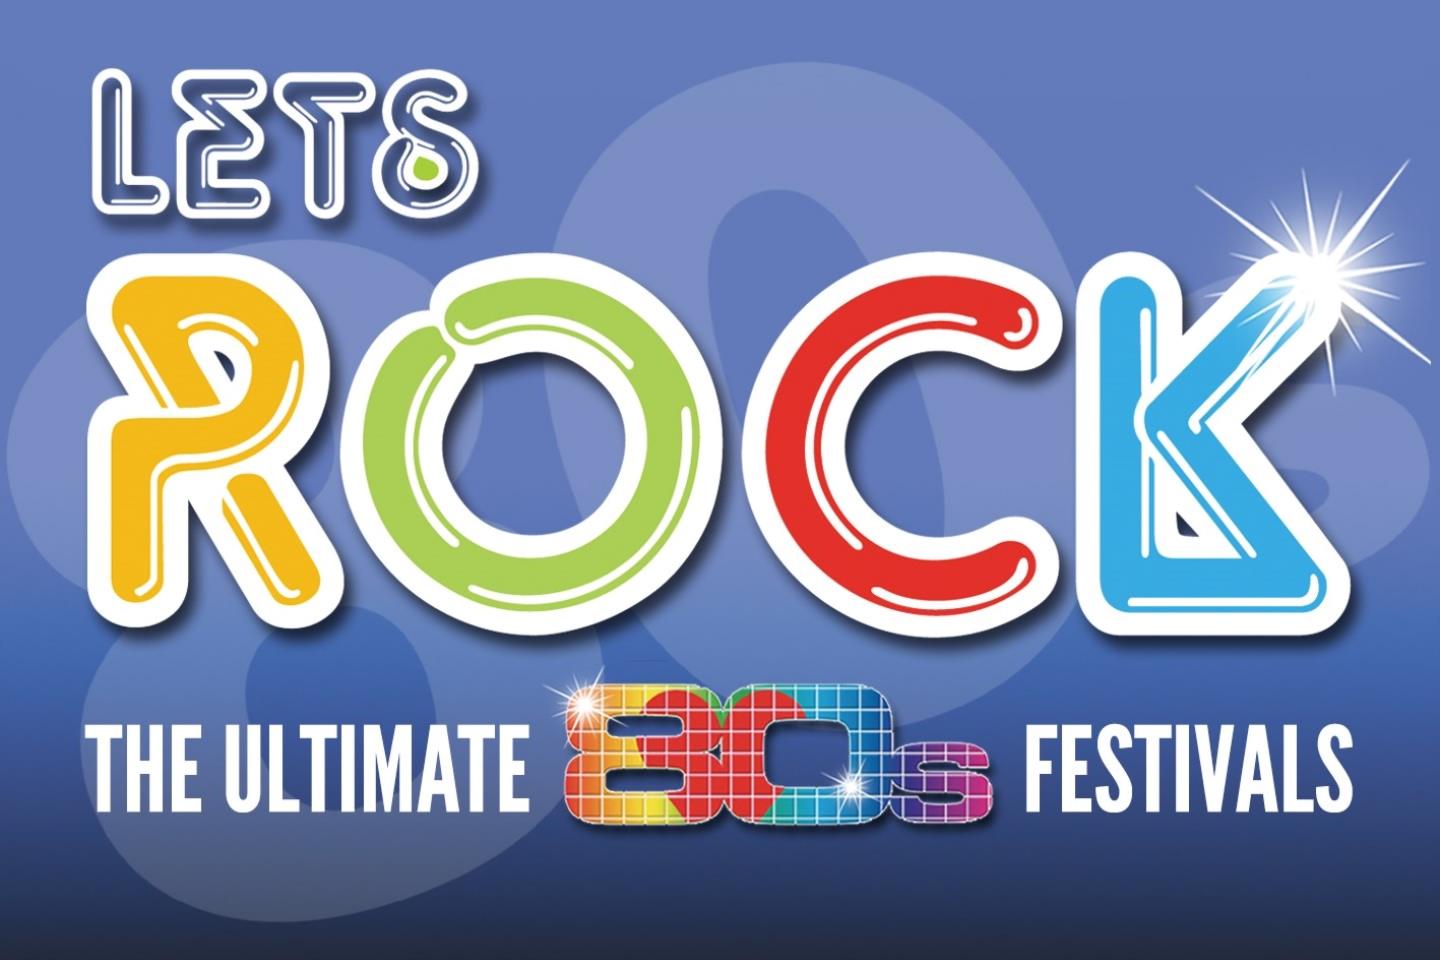 Let's Rock Festival 2023 Tickets Let's Rock Festival 2023 Lineup and